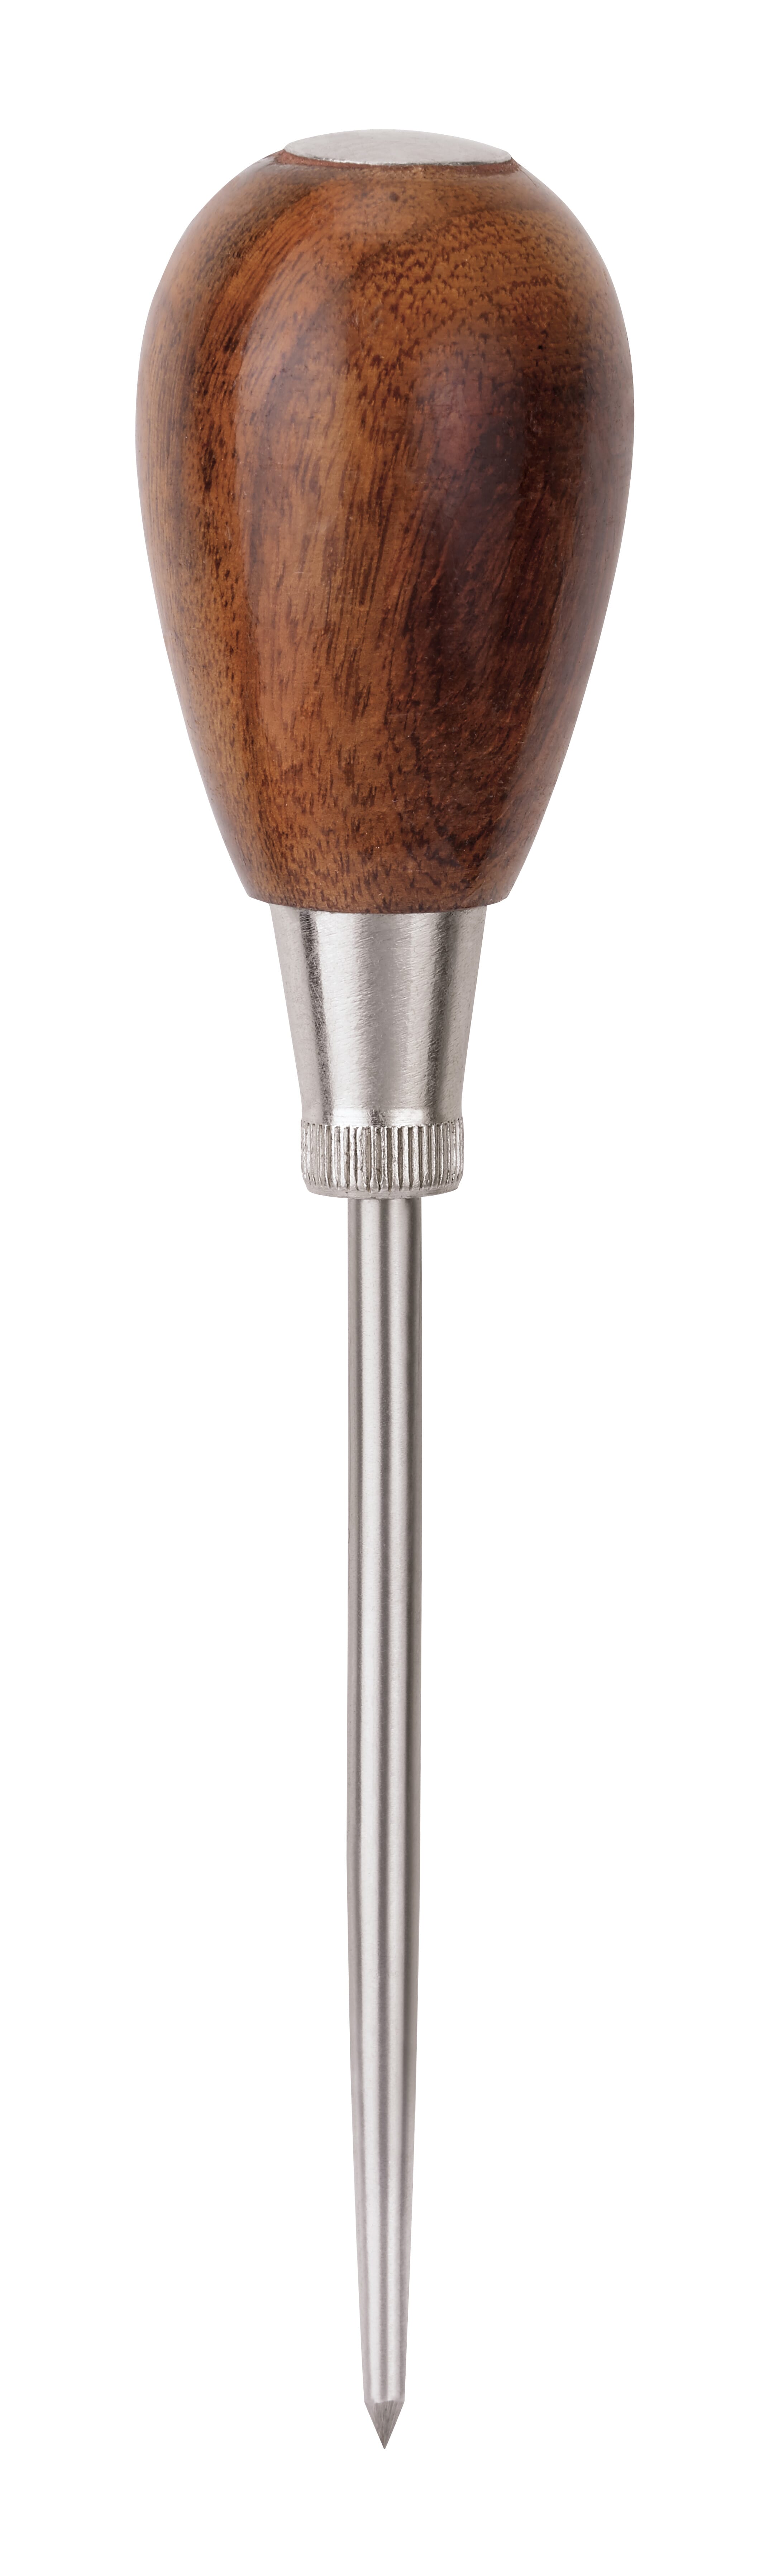 Milwaukee® Empire® 27026 Scratch Awl, 6-1/2 in OAL, High Carbon Steel